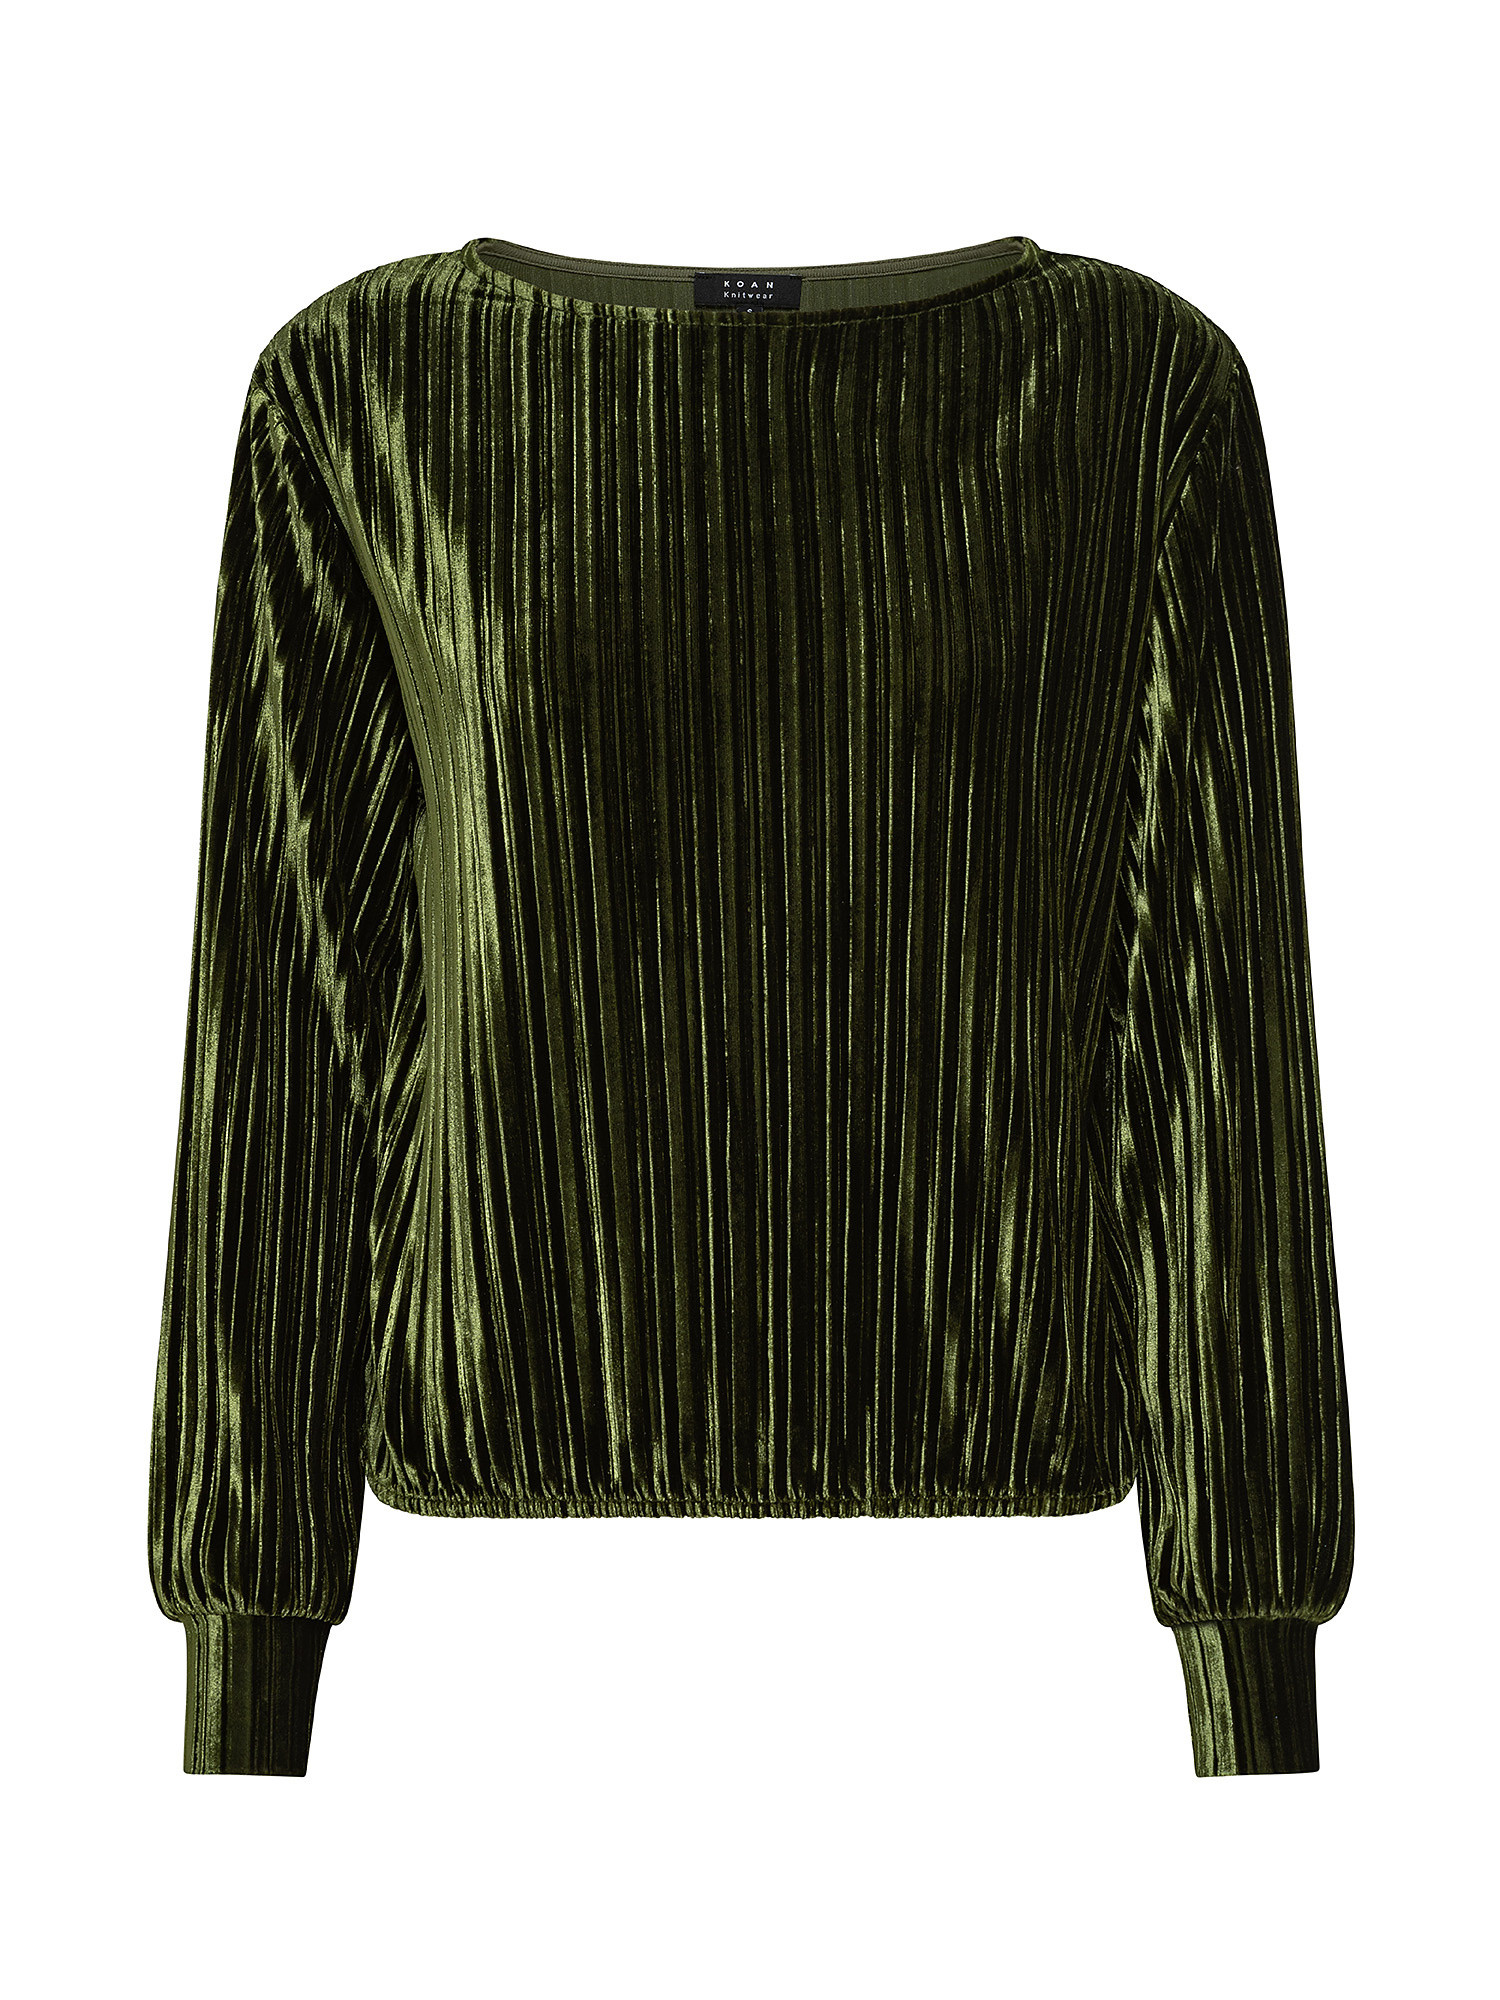 Pleated velor T-shirt, Green, large image number 0